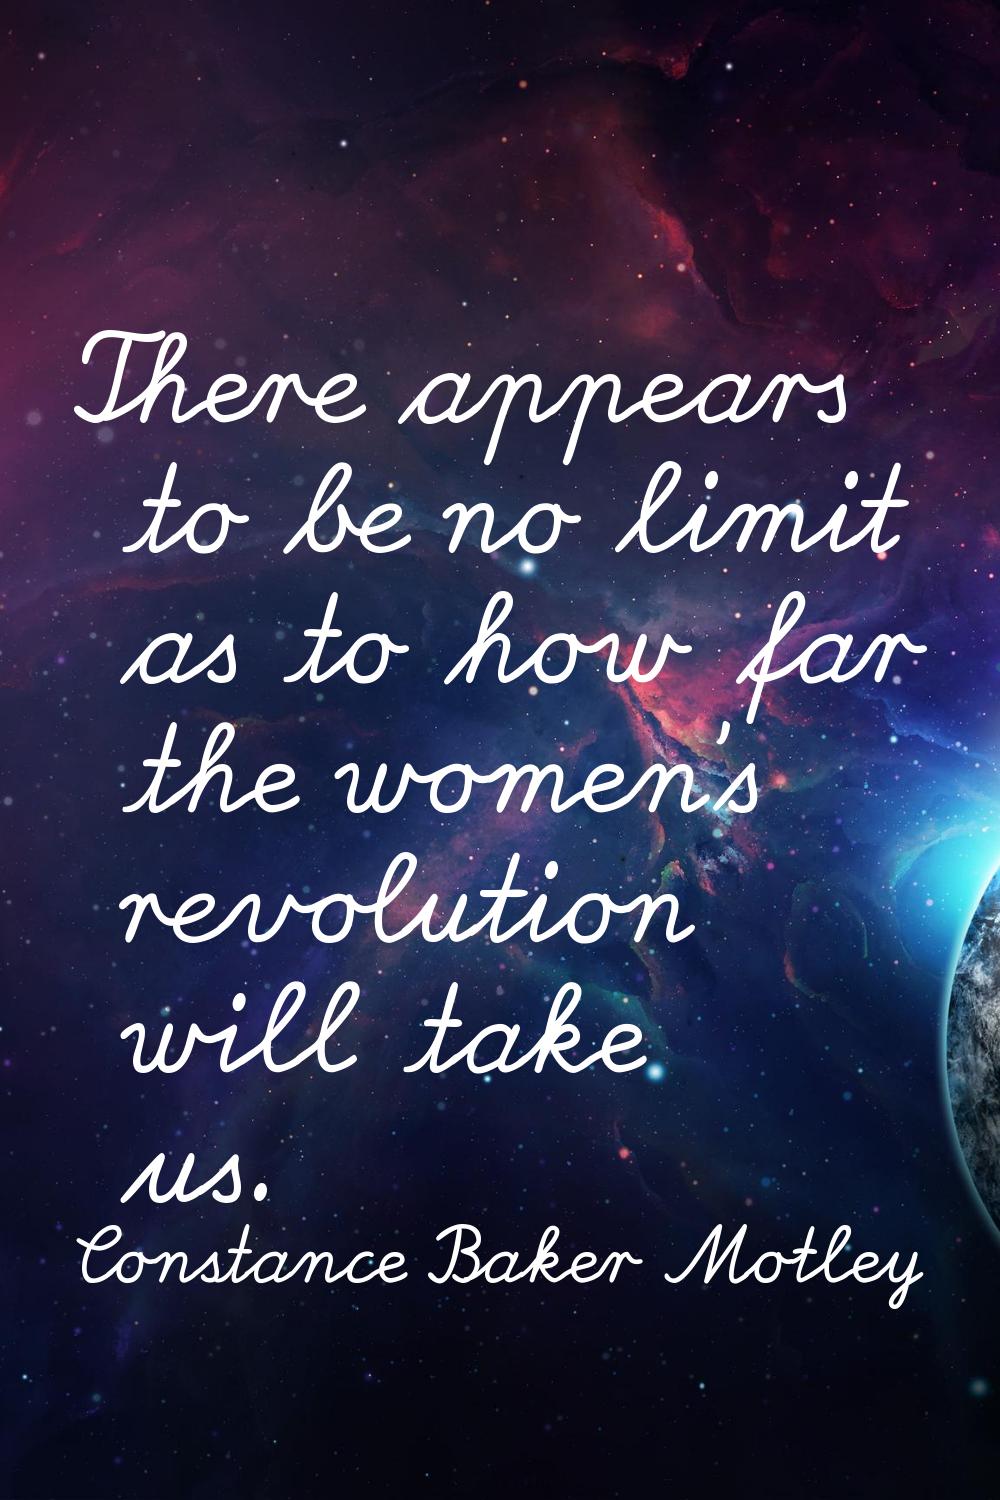 There appears to be no limit as to how far the women's revolution will take us.